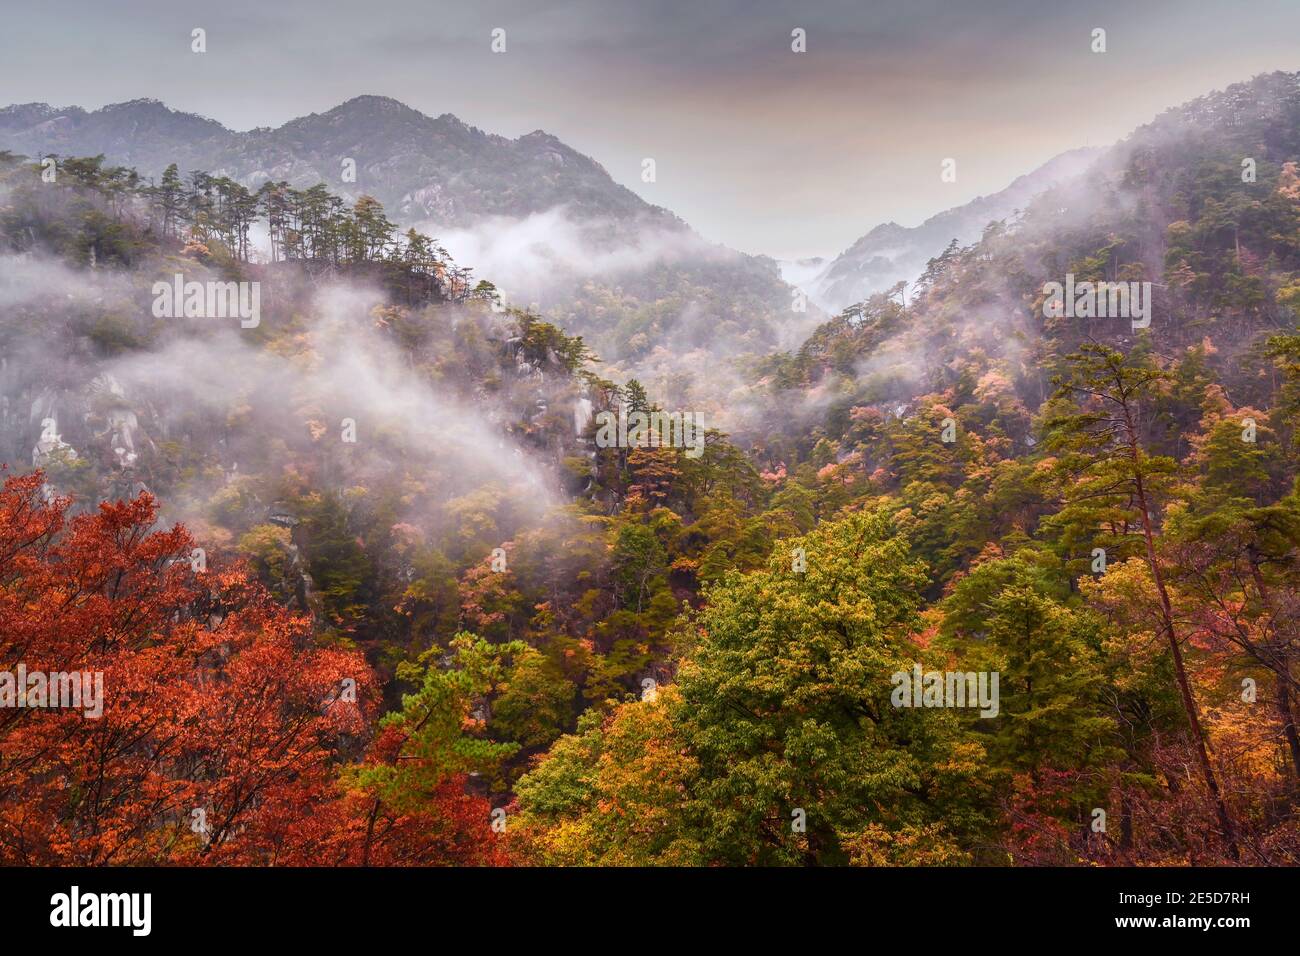 Mountain and autumn forest landscape in the mist, Yamanashi, Japan Stock Photo